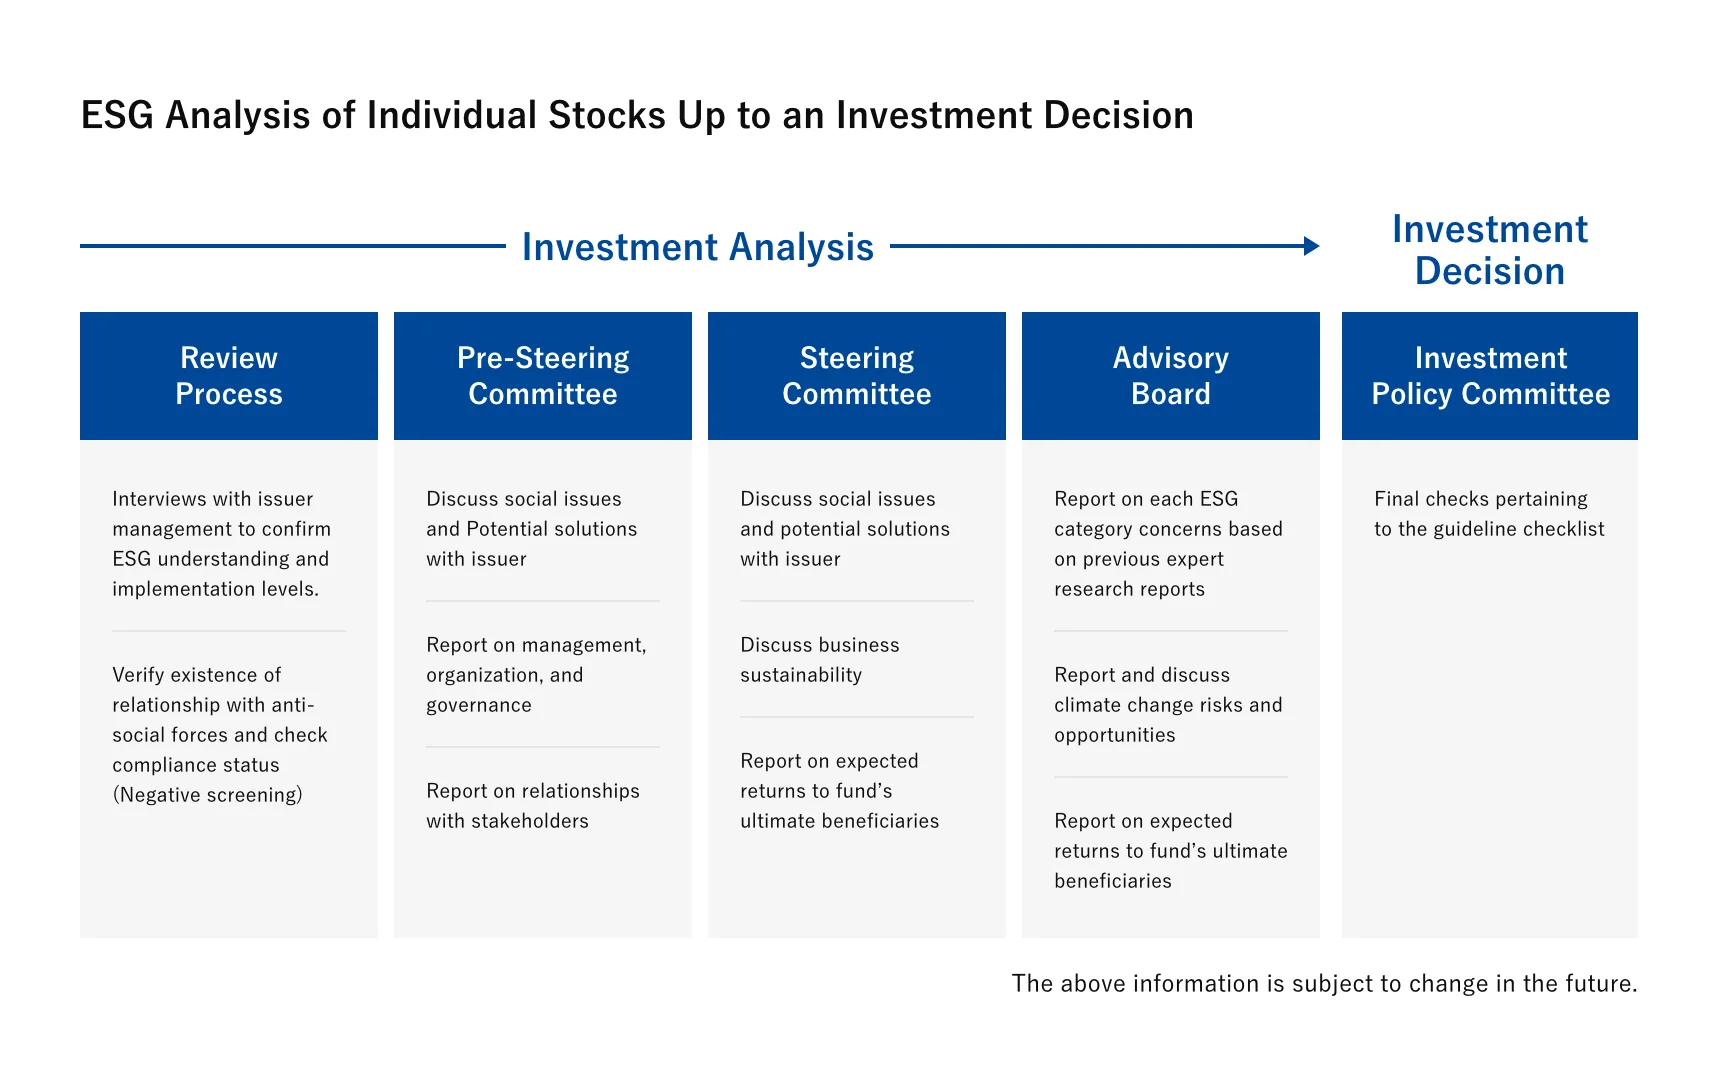 ESG Analysis of individual stocks up to an investment decision